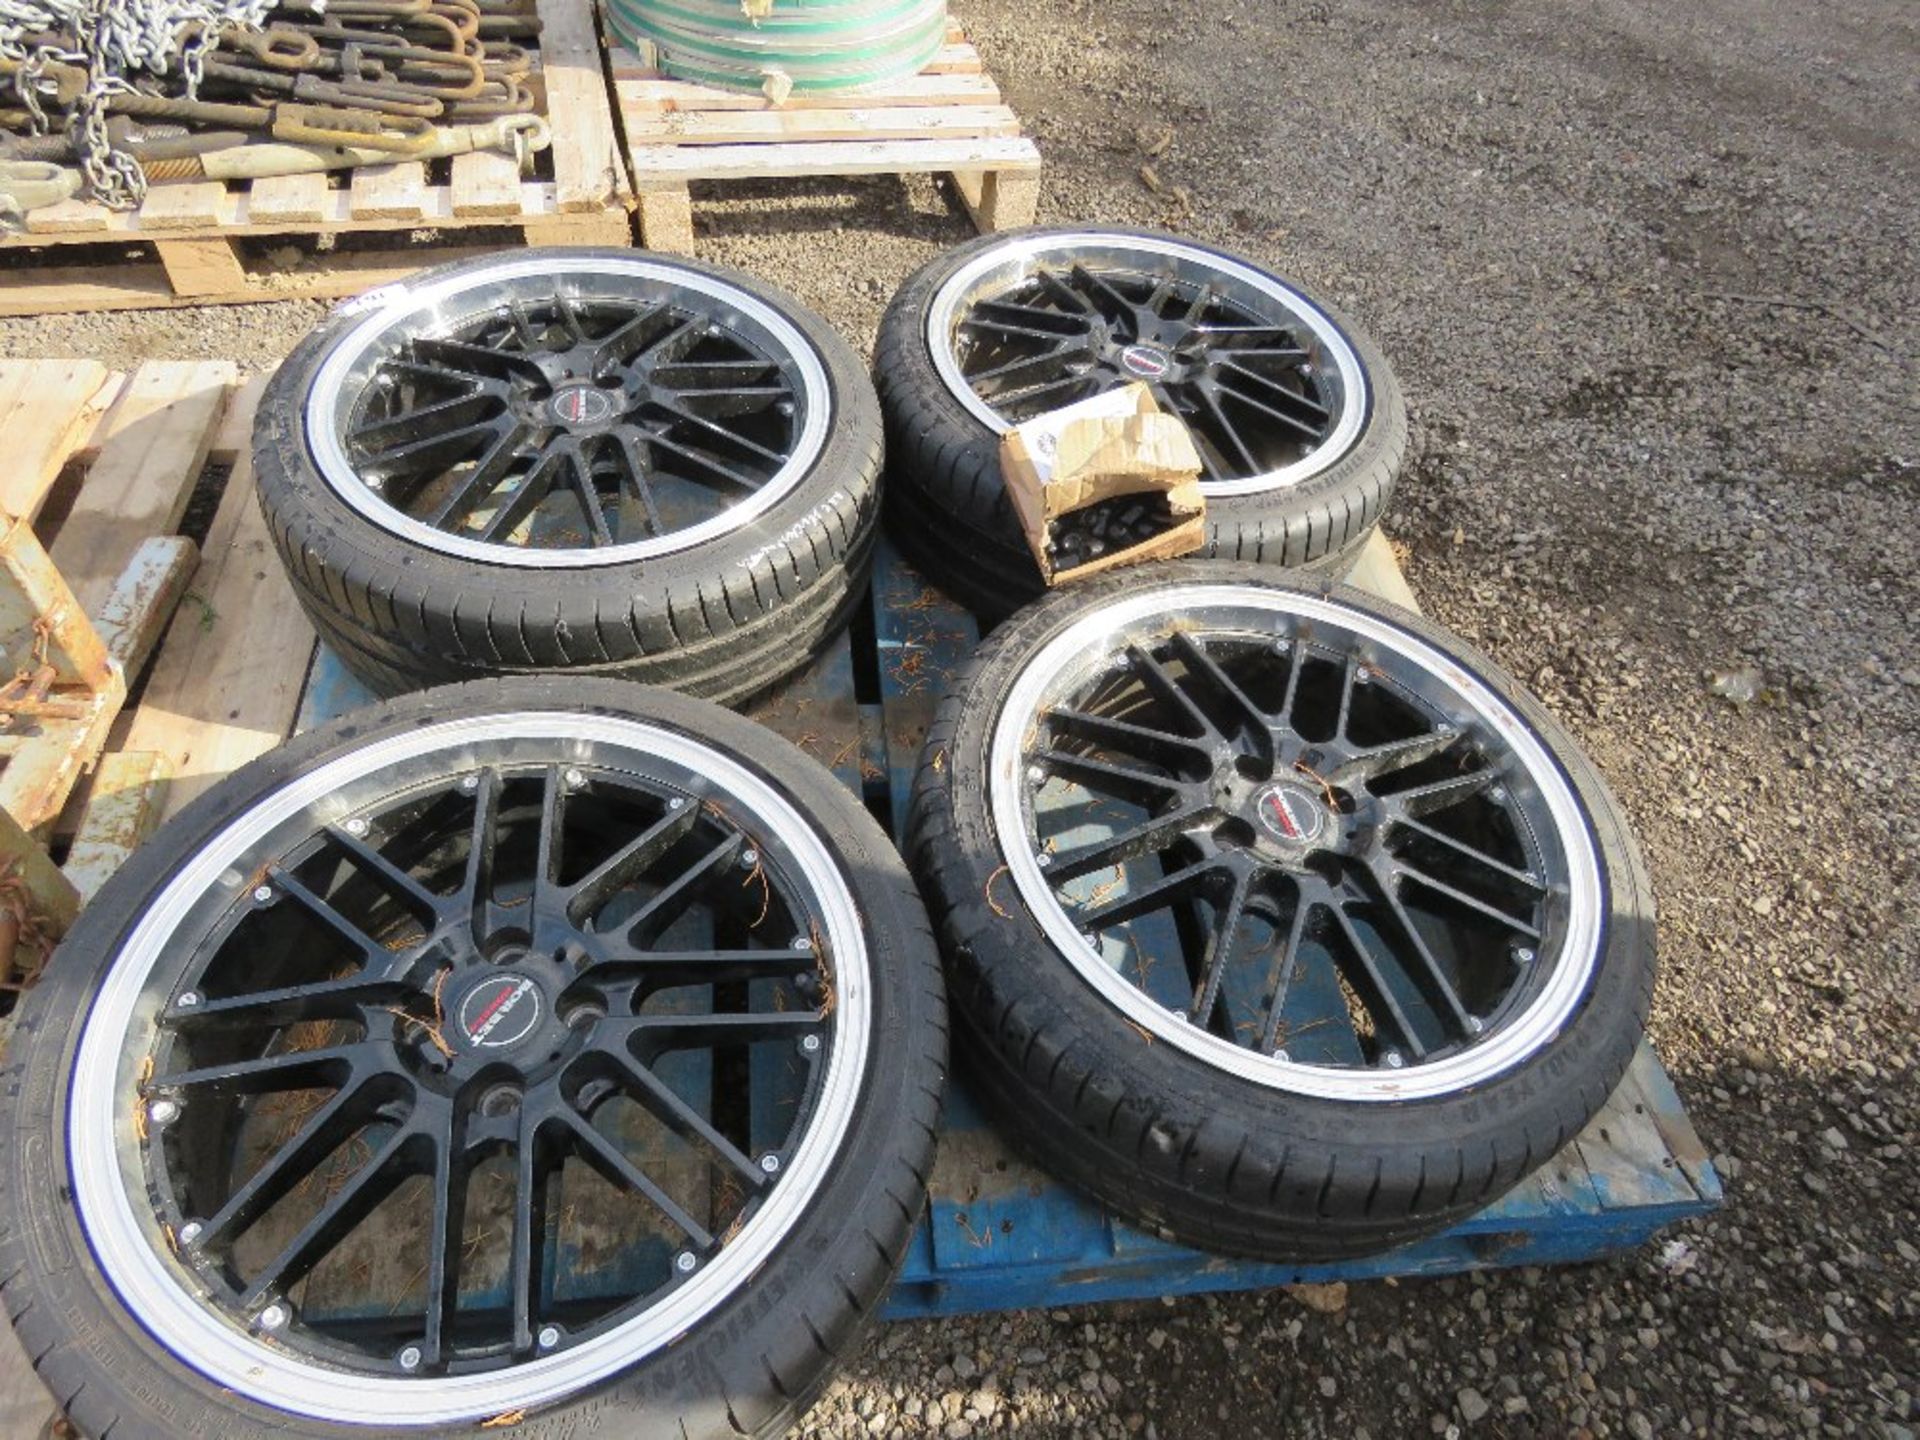 SET OF 4 195-40R17 ALLOY WHEELS AND TYRES WITH NUTS, SUITABLE FOR FIESTA?? THIS LOT IS SOLD UNDE - Image 4 of 4